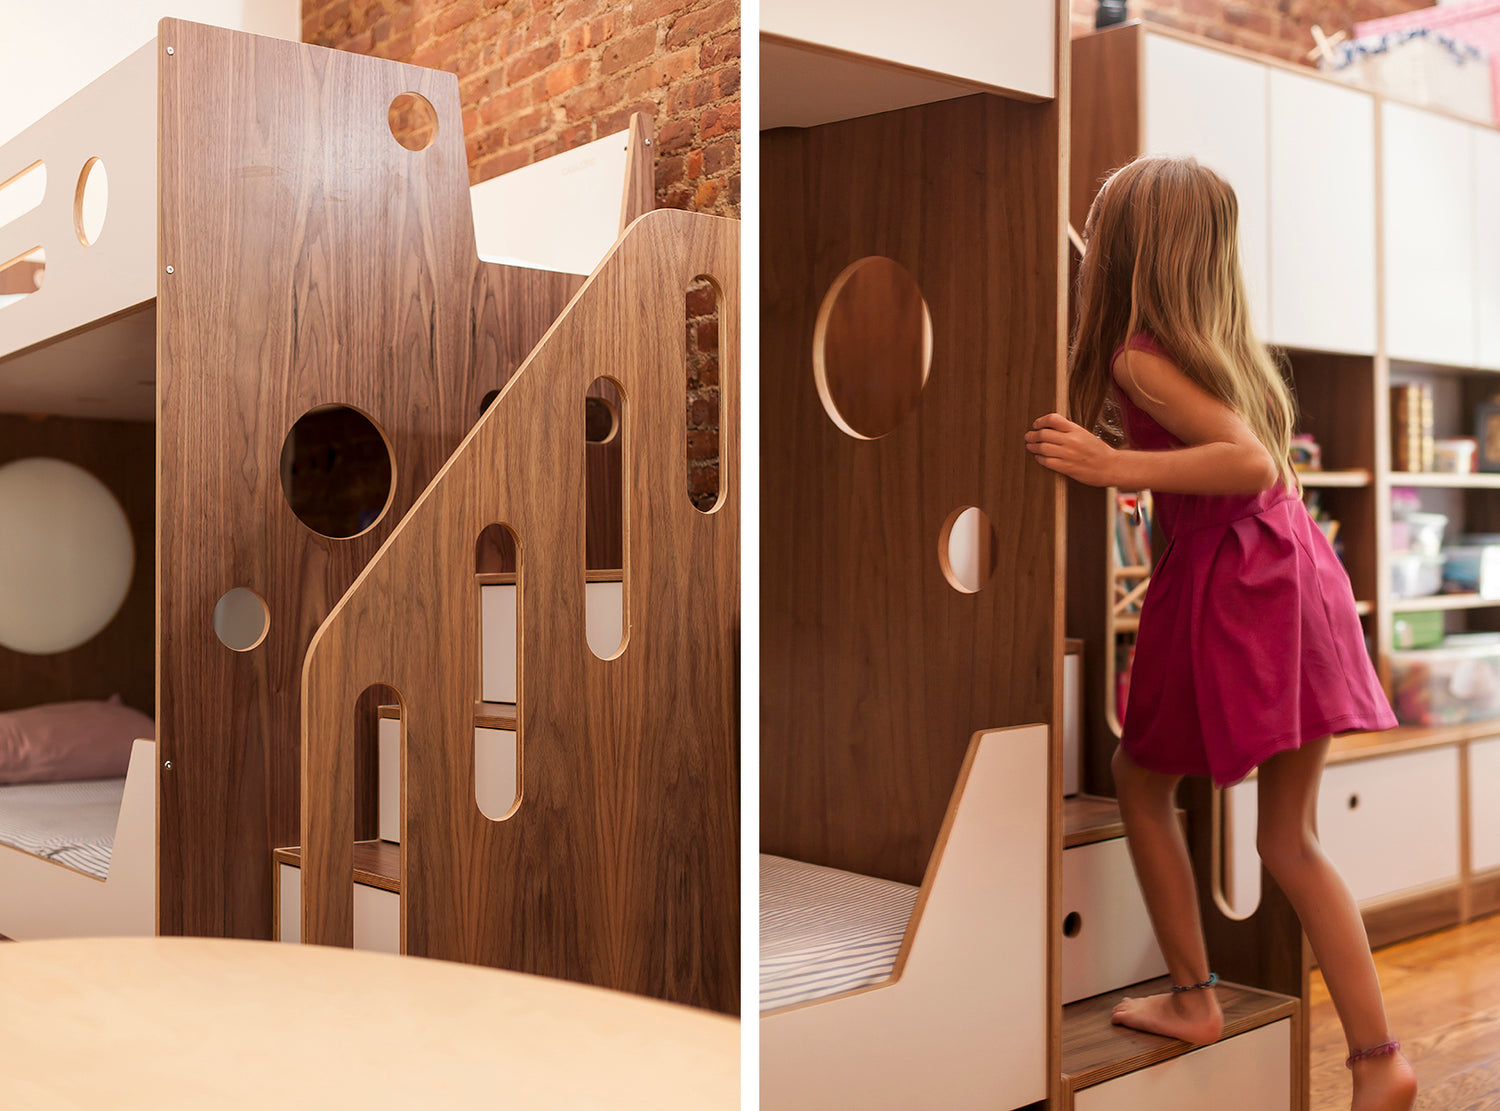 Child climbs wooden play structure with stairs and holes.